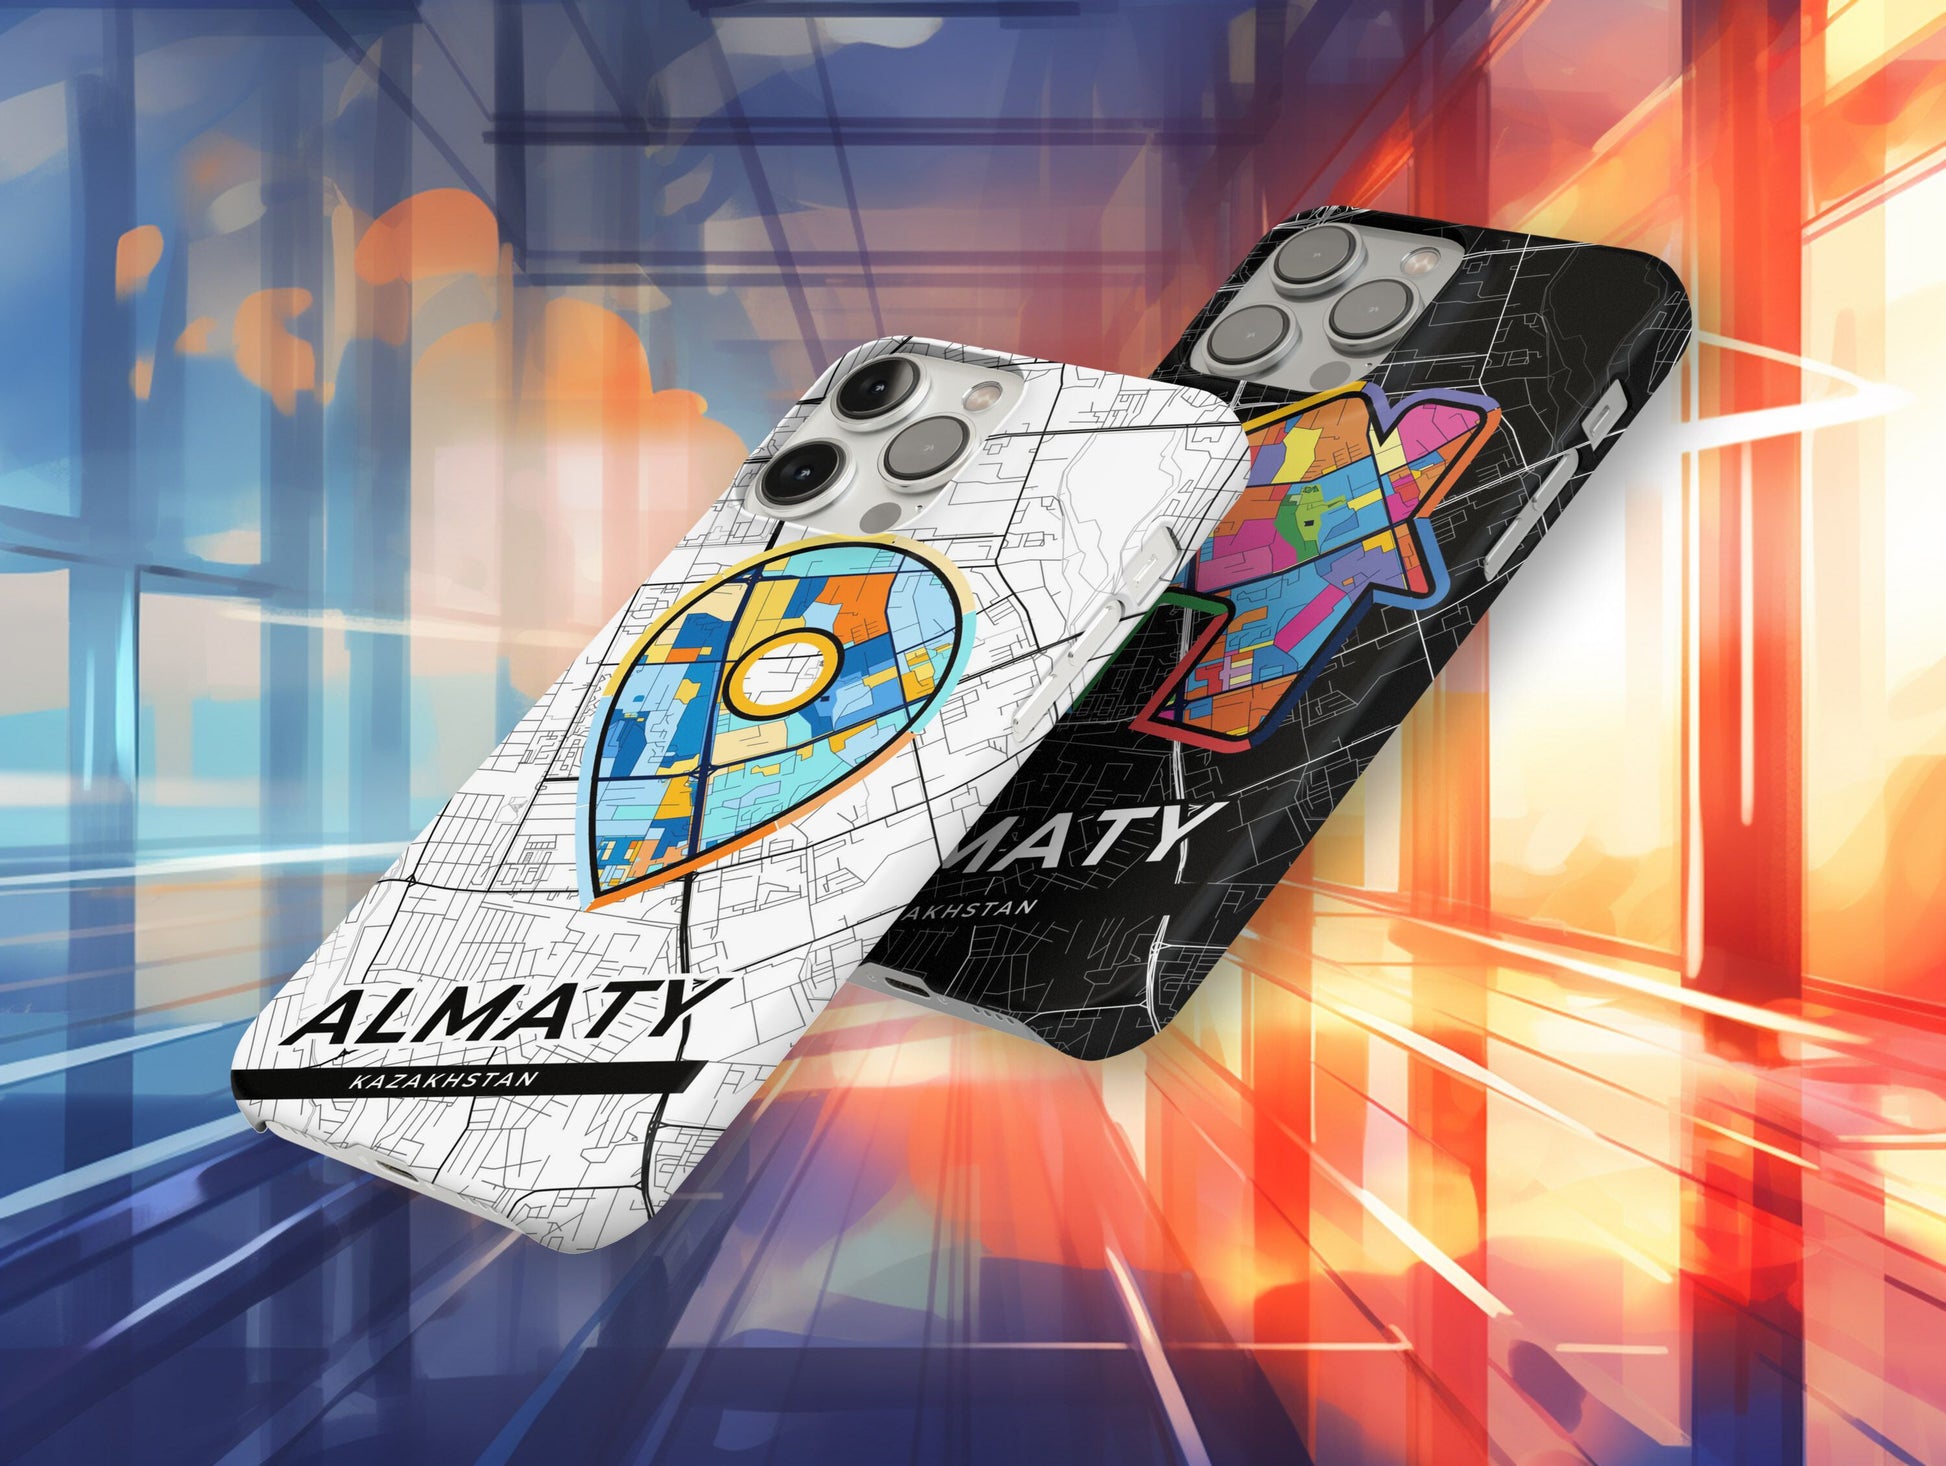 Almaty Kazakhstan slim phone case with colorful icon. Birthday, wedding or housewarming gift. Couple match cases.